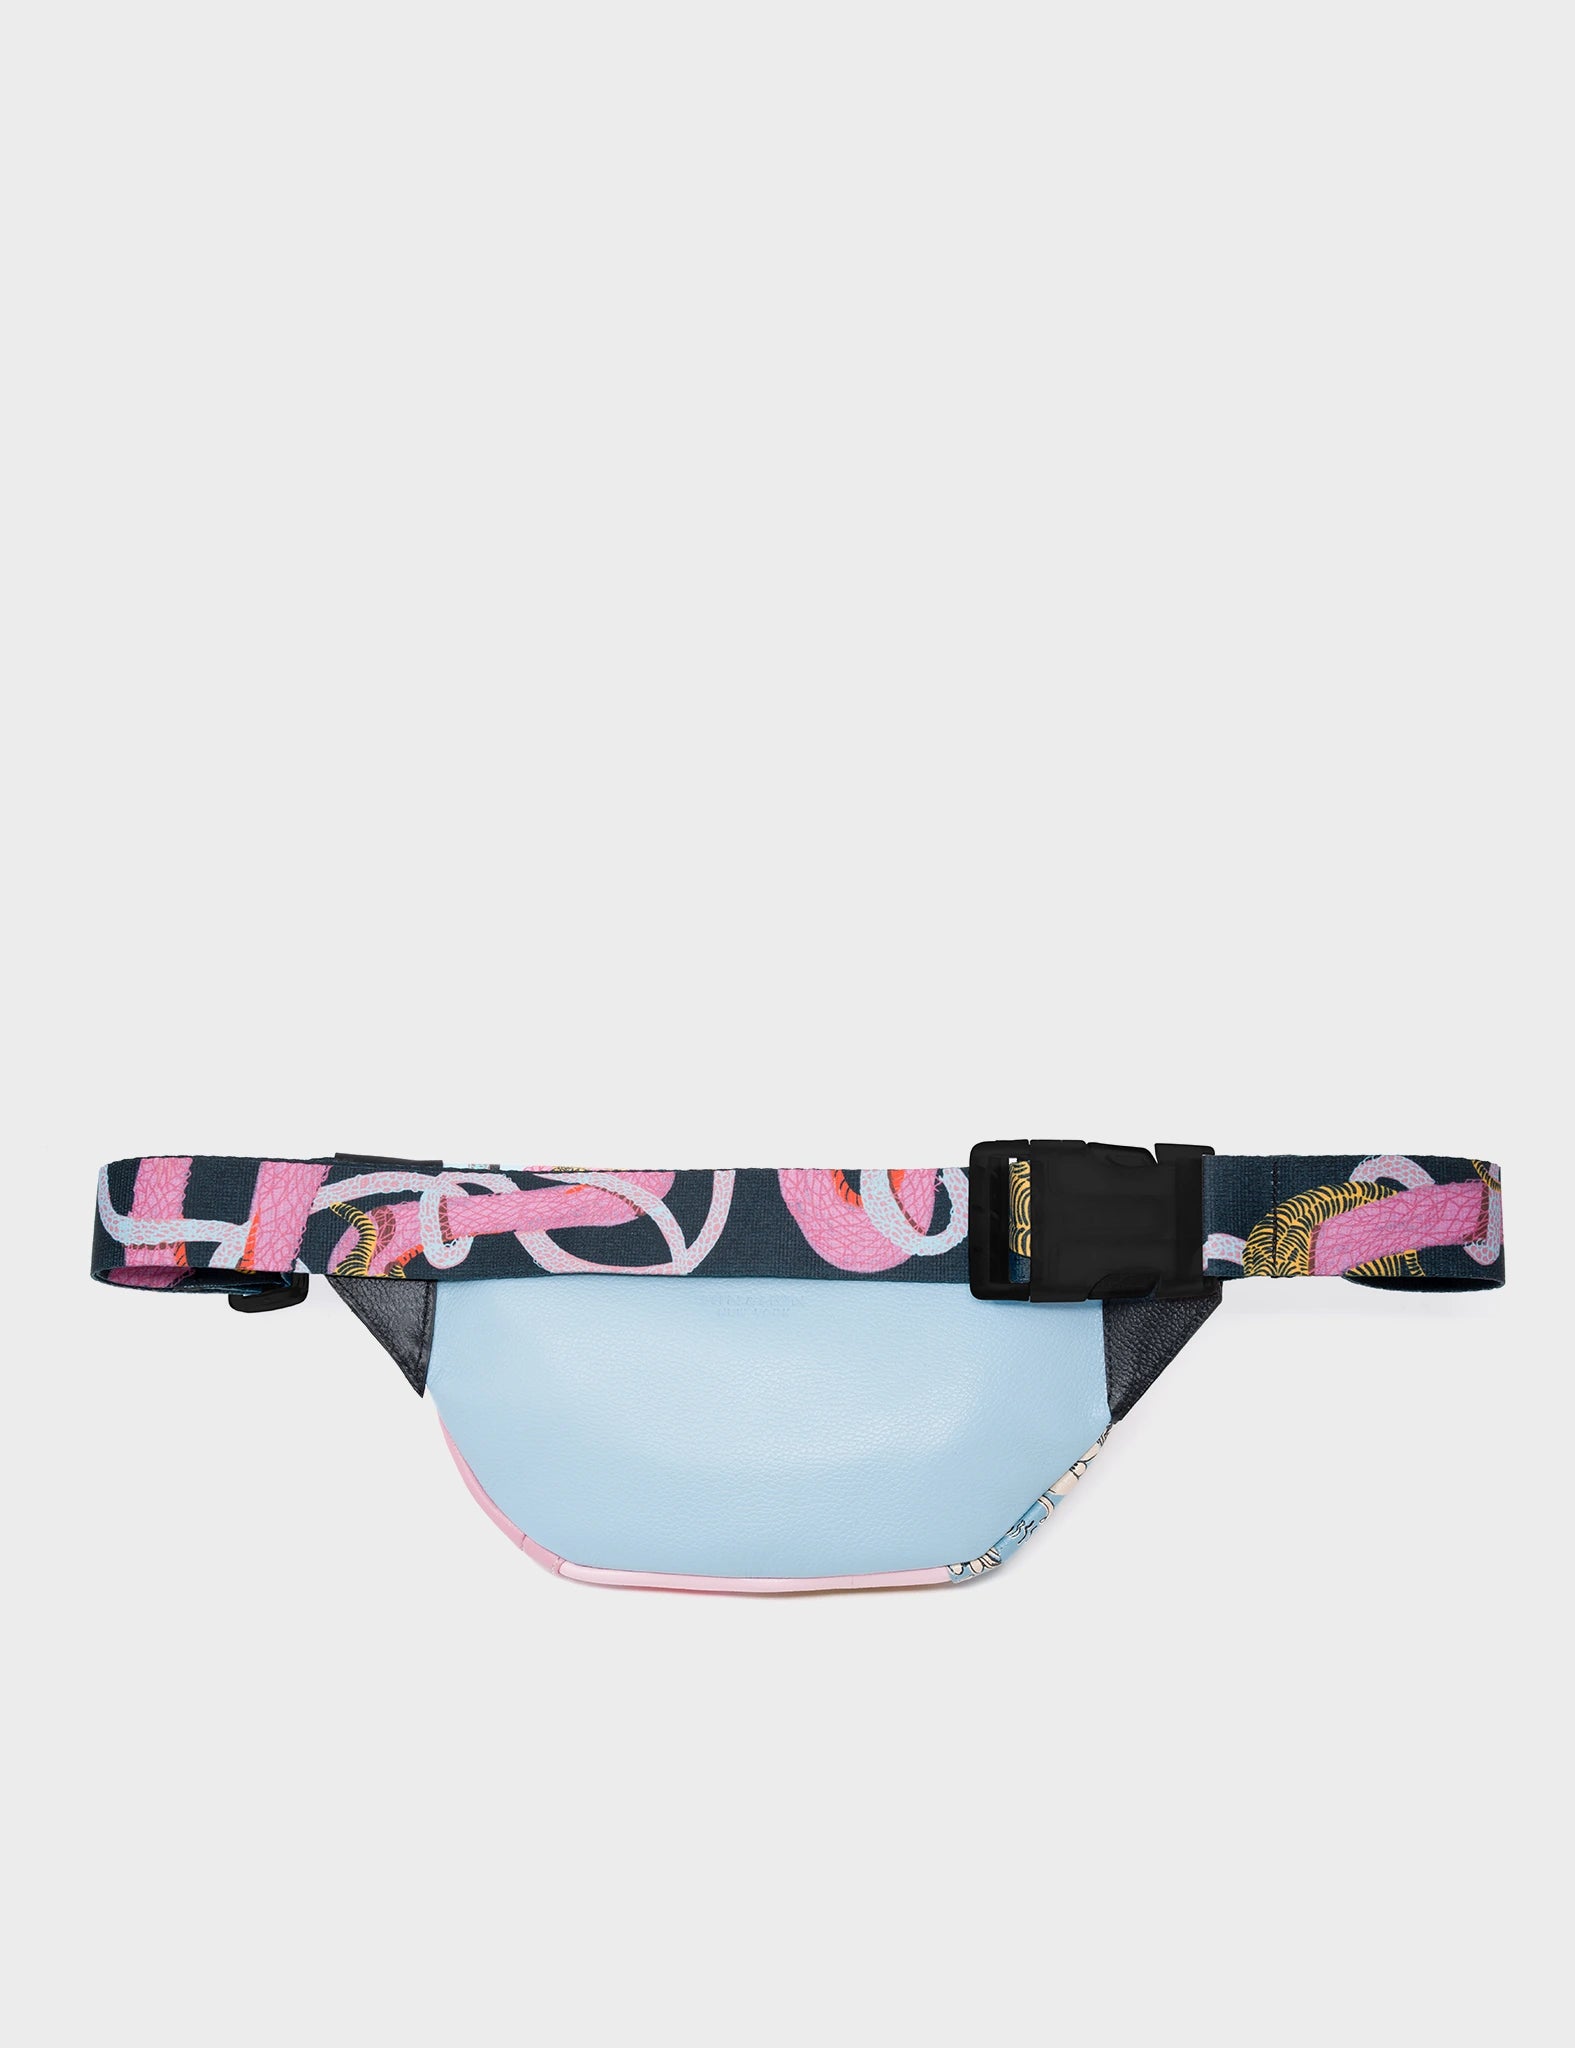 Fanny Pack Pink And Blue Leather - Tangled Tiger & Snake Print - Back 